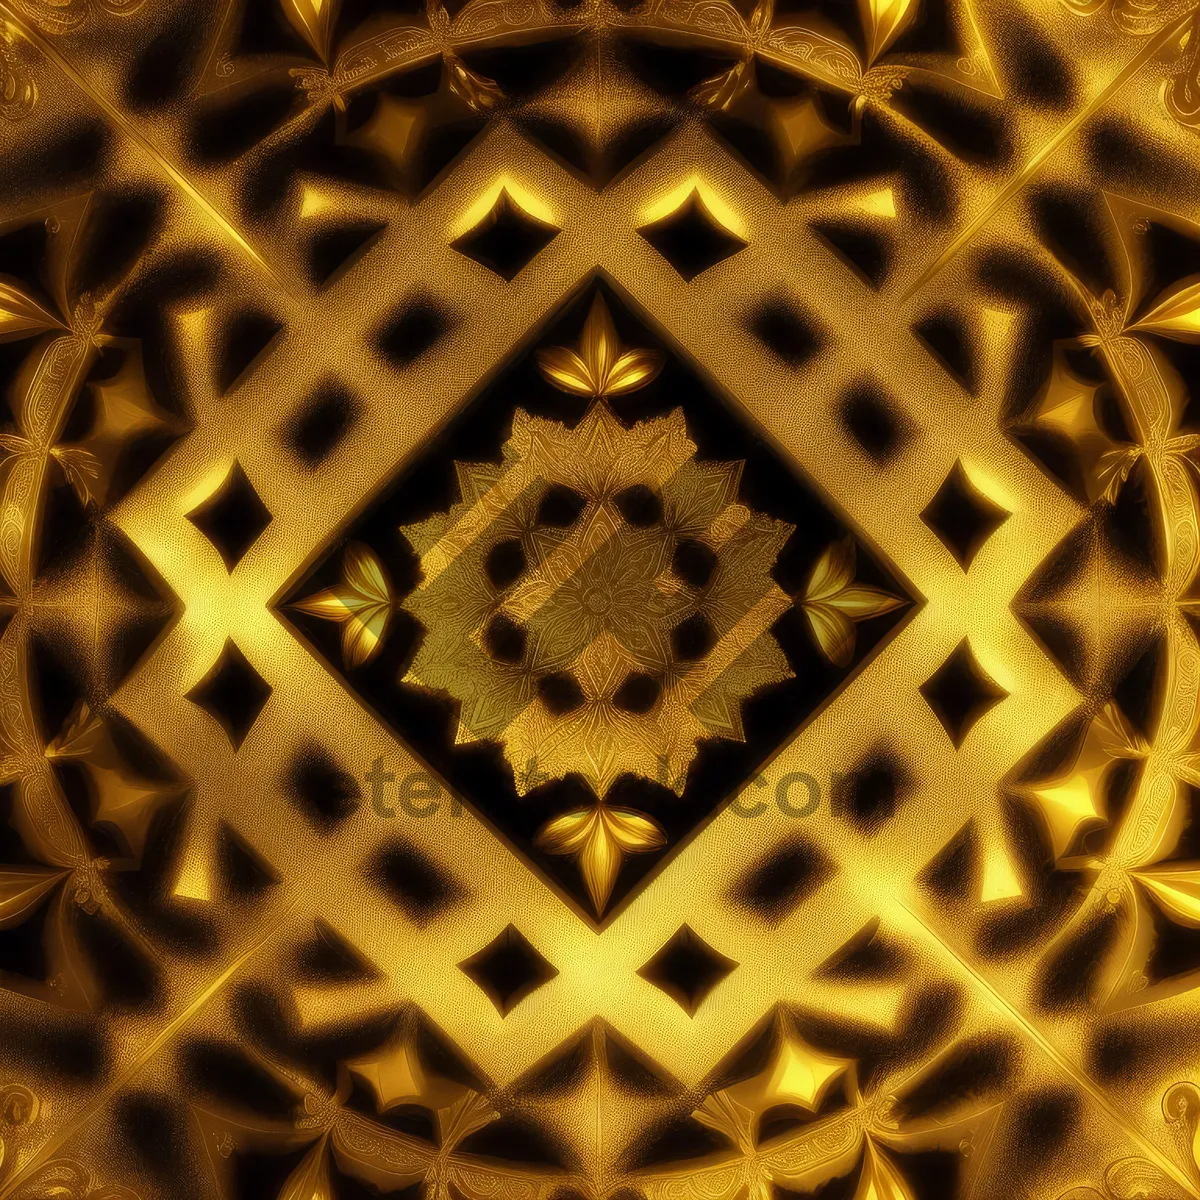 Picture of Arabesque Honeycomb Design: Intricate Patterned Framework